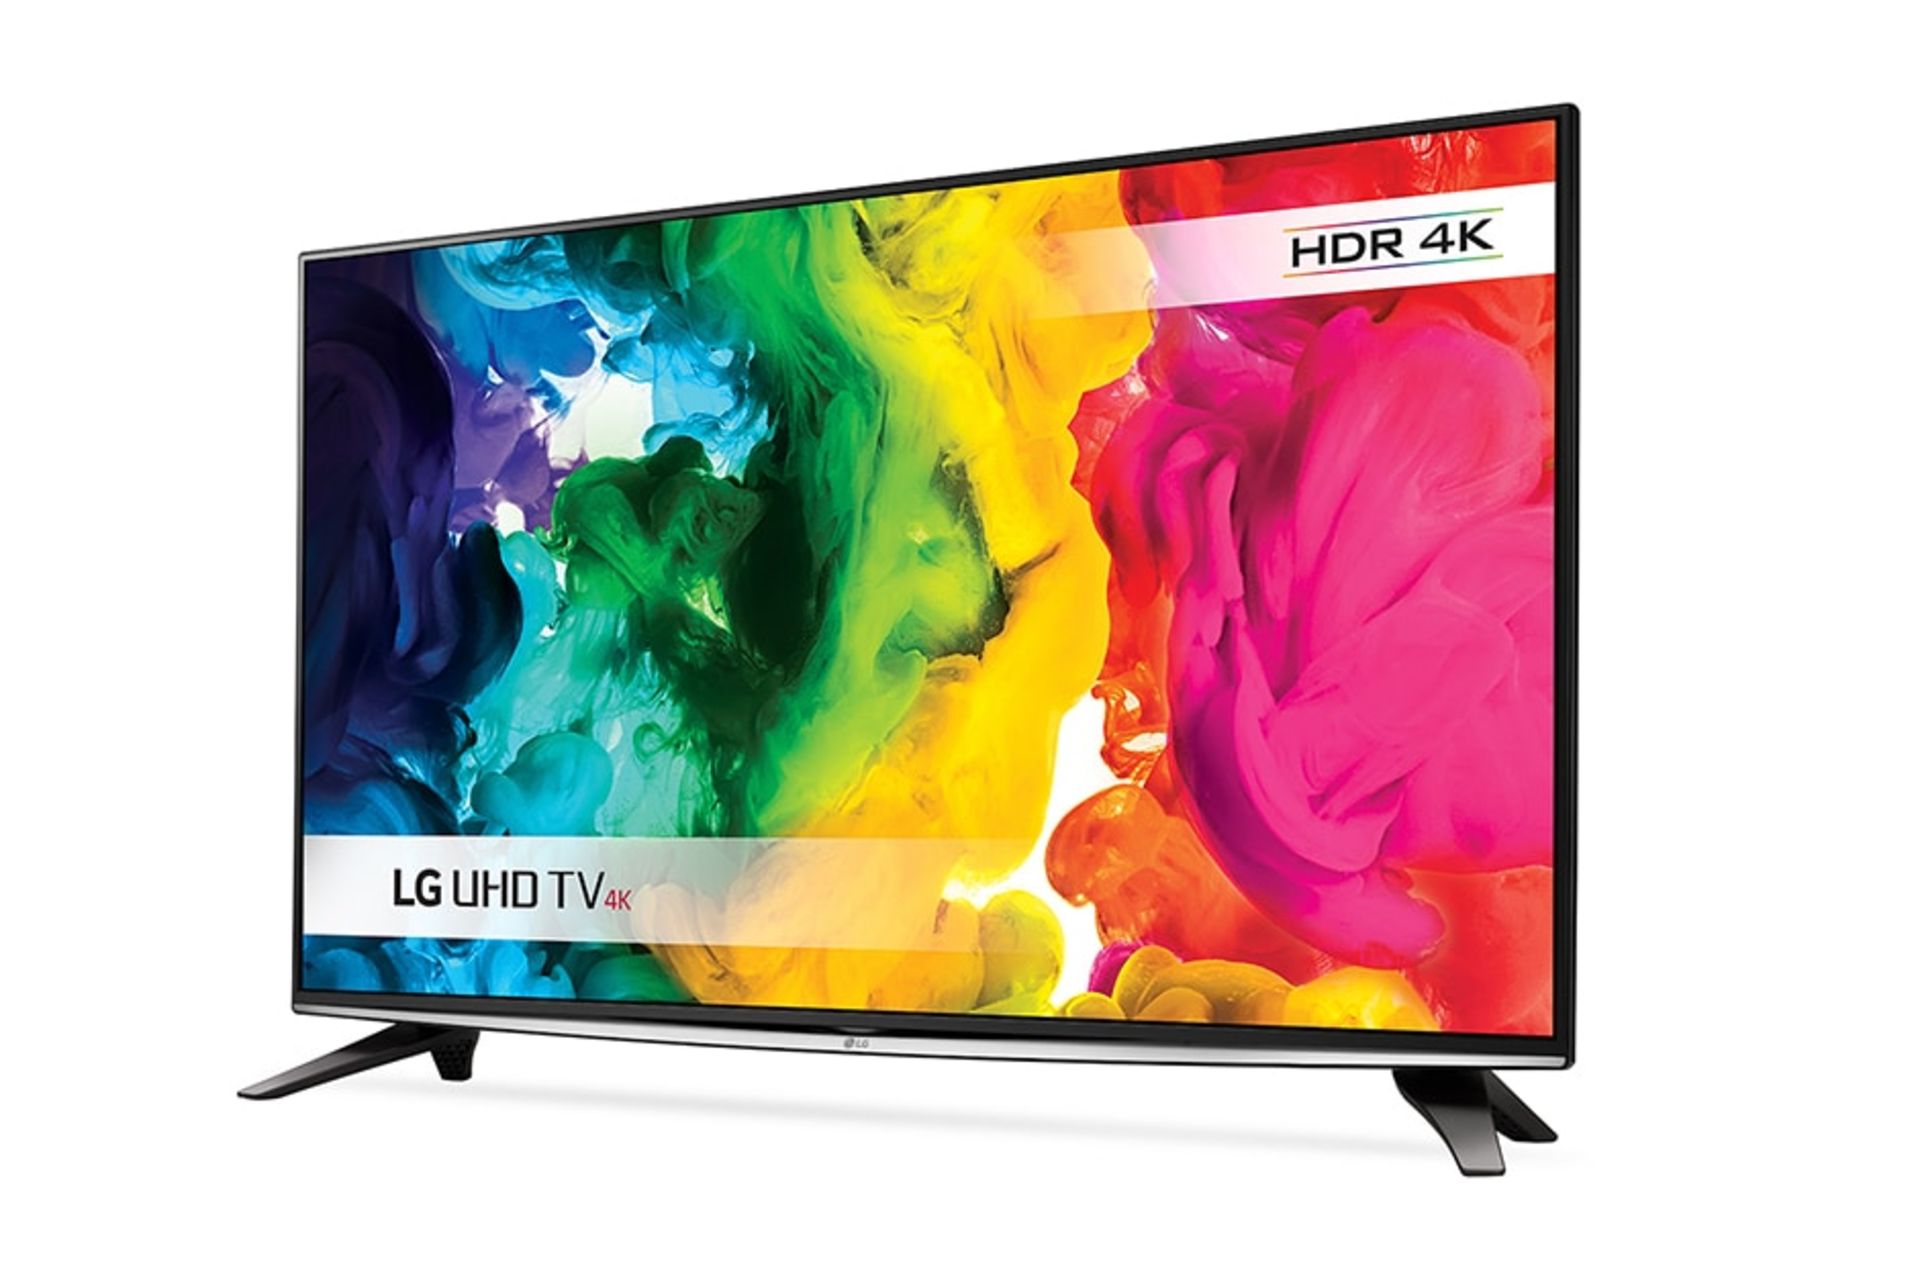 1 LG 58UH635V 58 INCH SMART 4K ULTRA HD HDR LED TV RRP Â£699 (WORKING, NO STAND OR REMOTE)